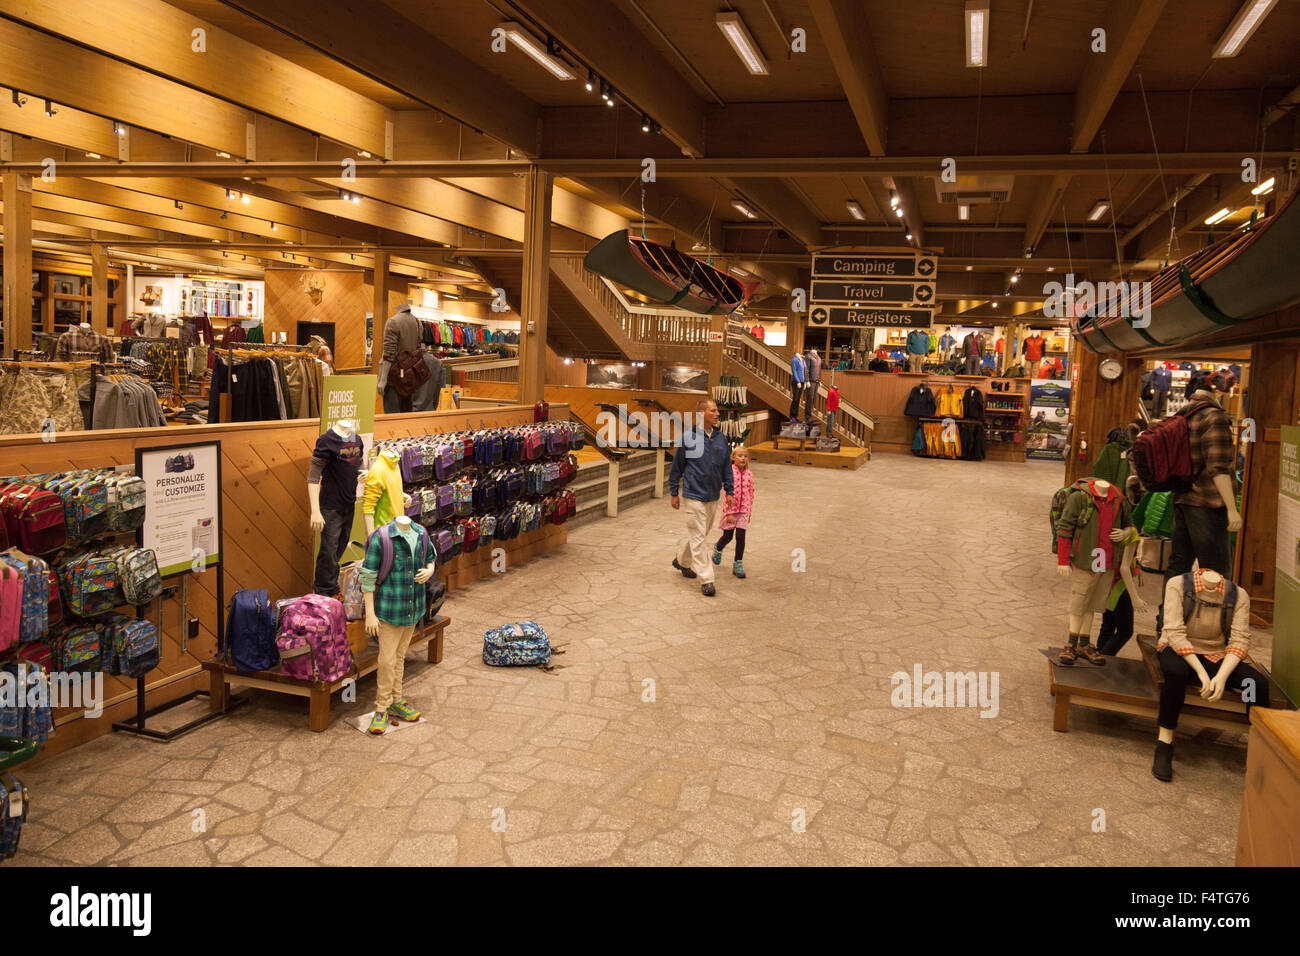 People shopping in the interior of the L.L. Bean retail store, Freeport, Maine USA. FOR EDITORIAL USE ONLY Stock Photo